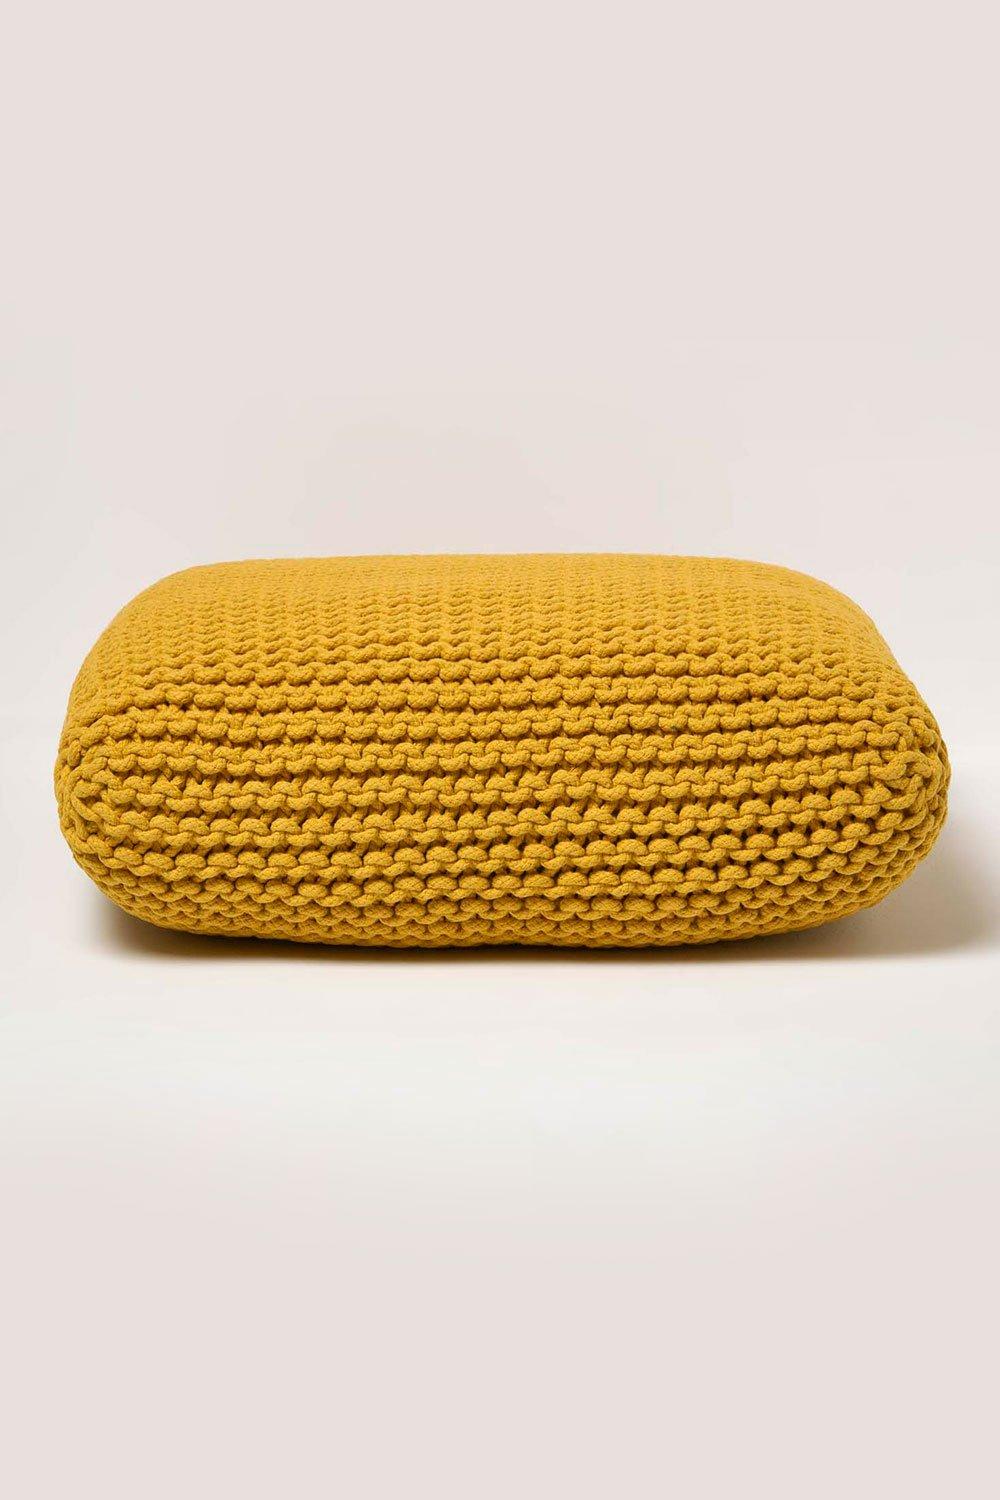 Homescapes Square Cotton Knitted Pouffe Floor Cushion|yellow